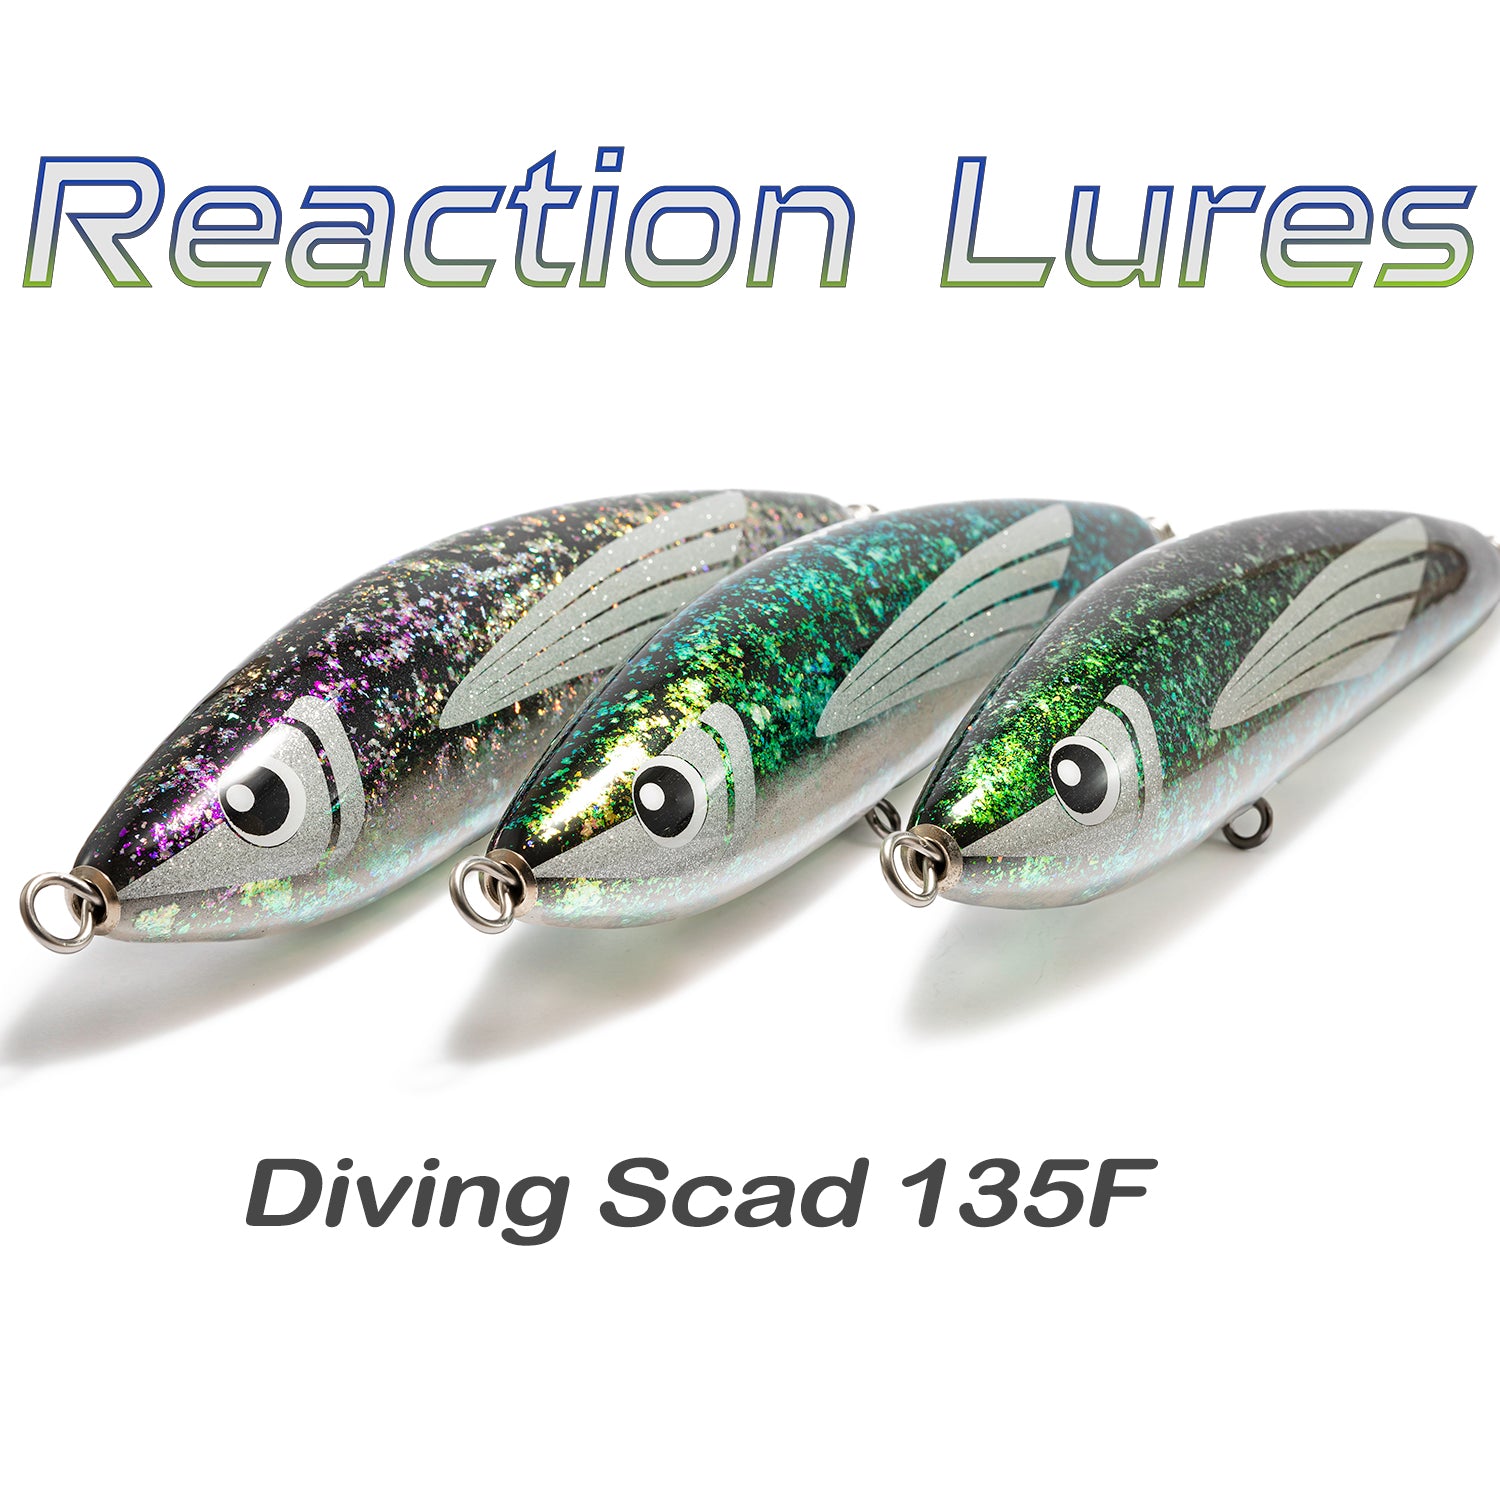 Reaction Lures Diving Scad 135 - Compleat Angler Nedlands Pro Tackle